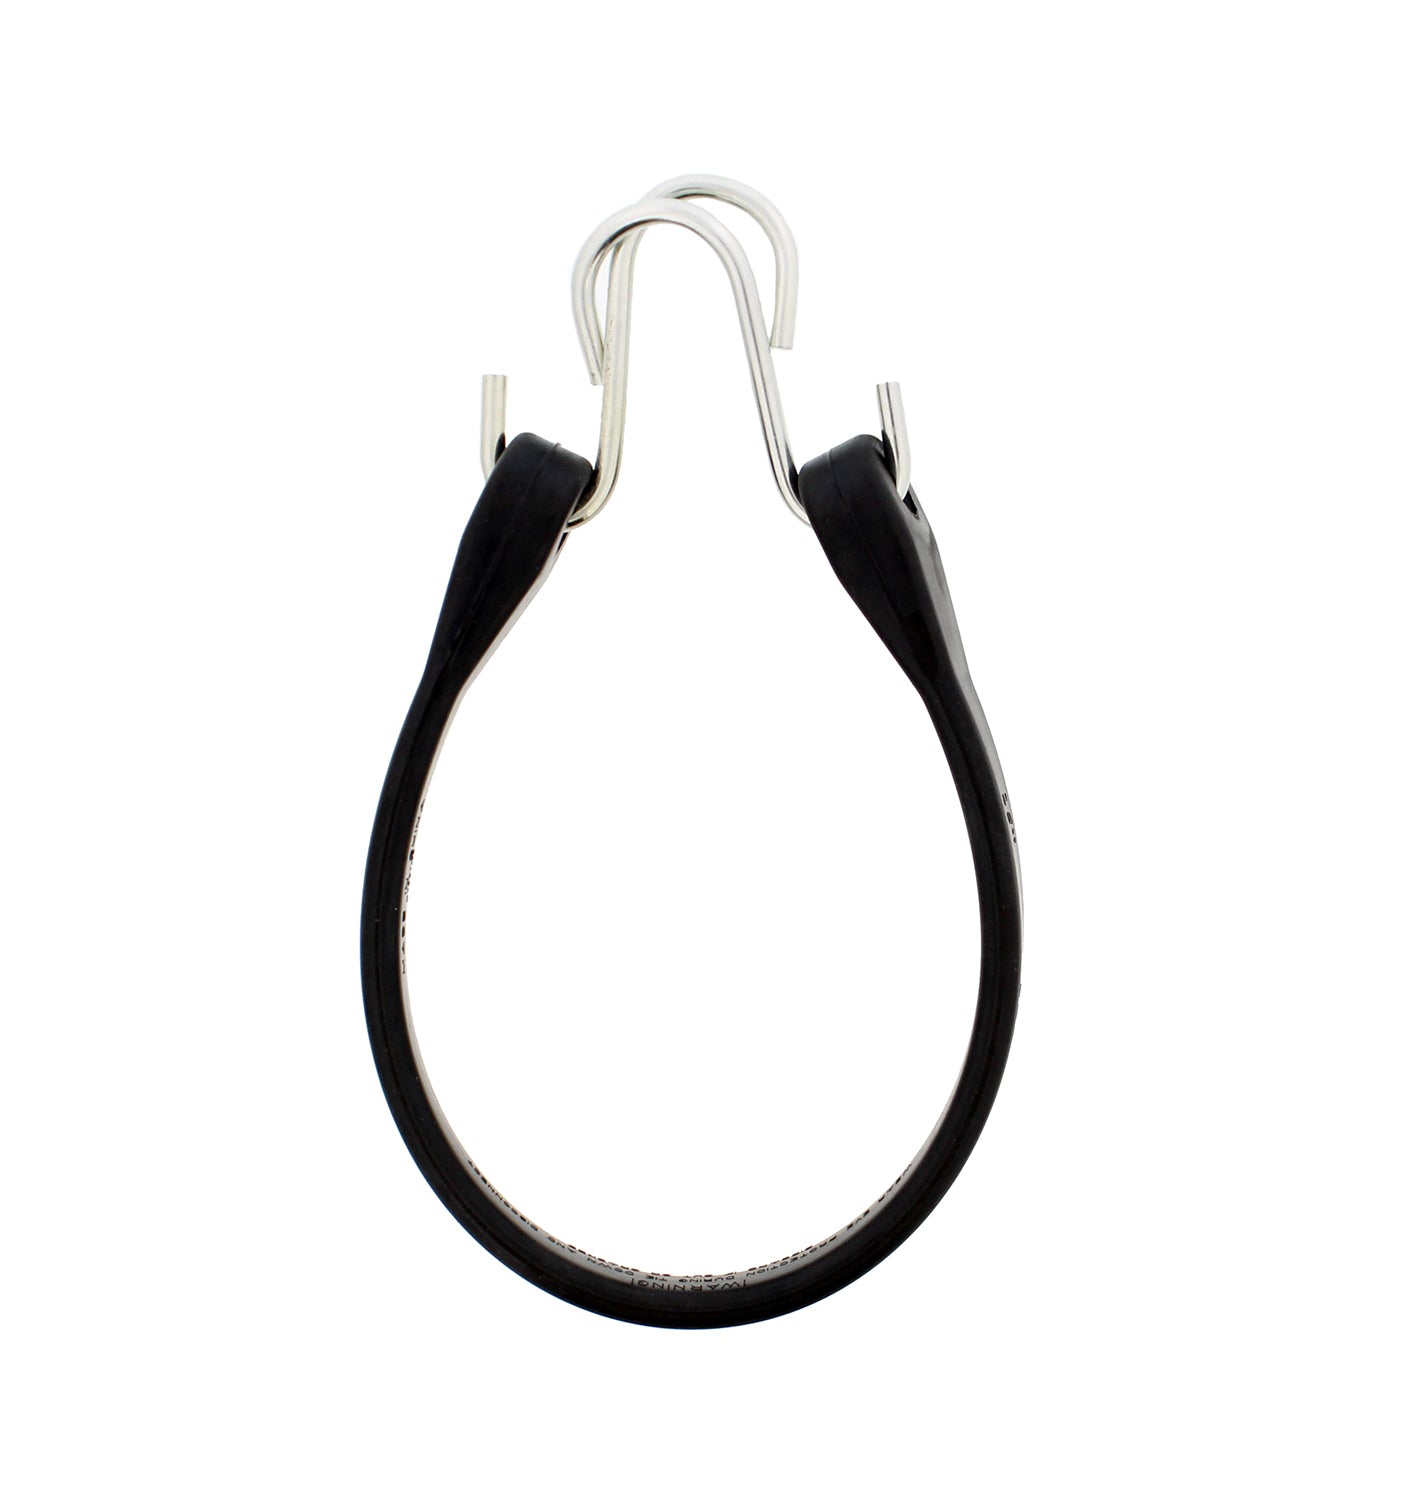 EPDM Rubber Straps with Hooks - 15in Black Rubber Bungee Cords, 10Pk